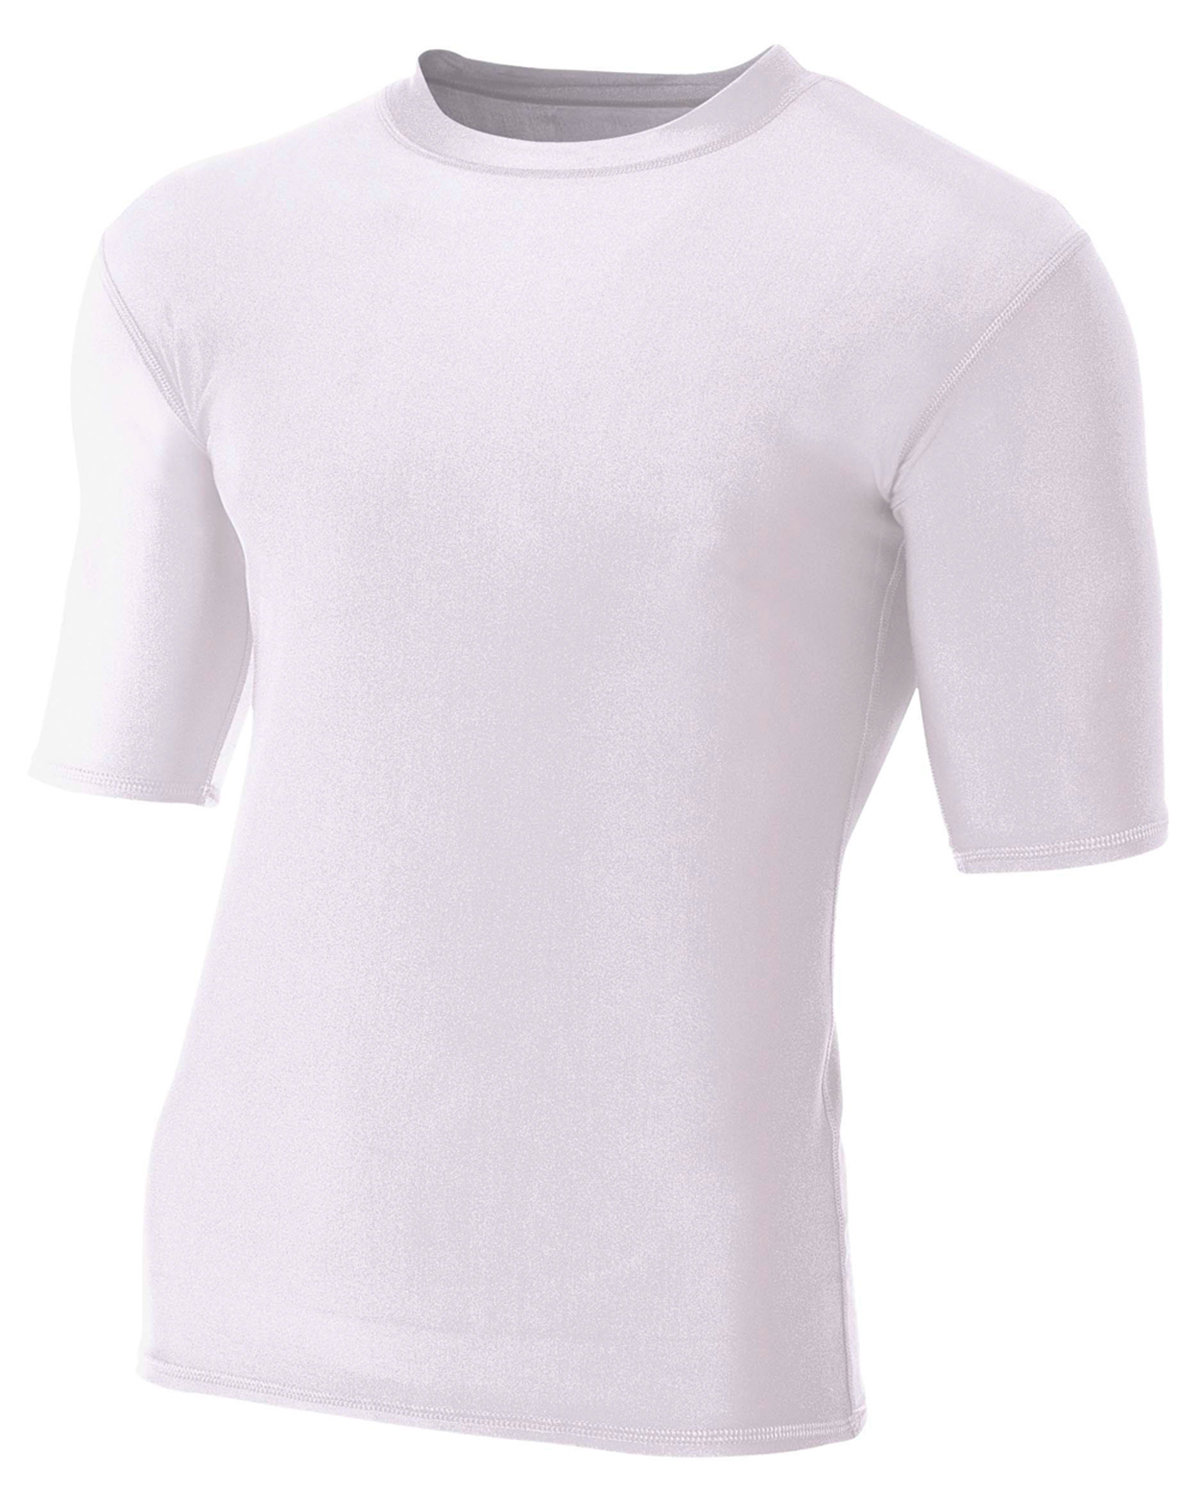 Buy Mens Half Sleeve Compression T-Shirt - A4 Online at Best price - NC